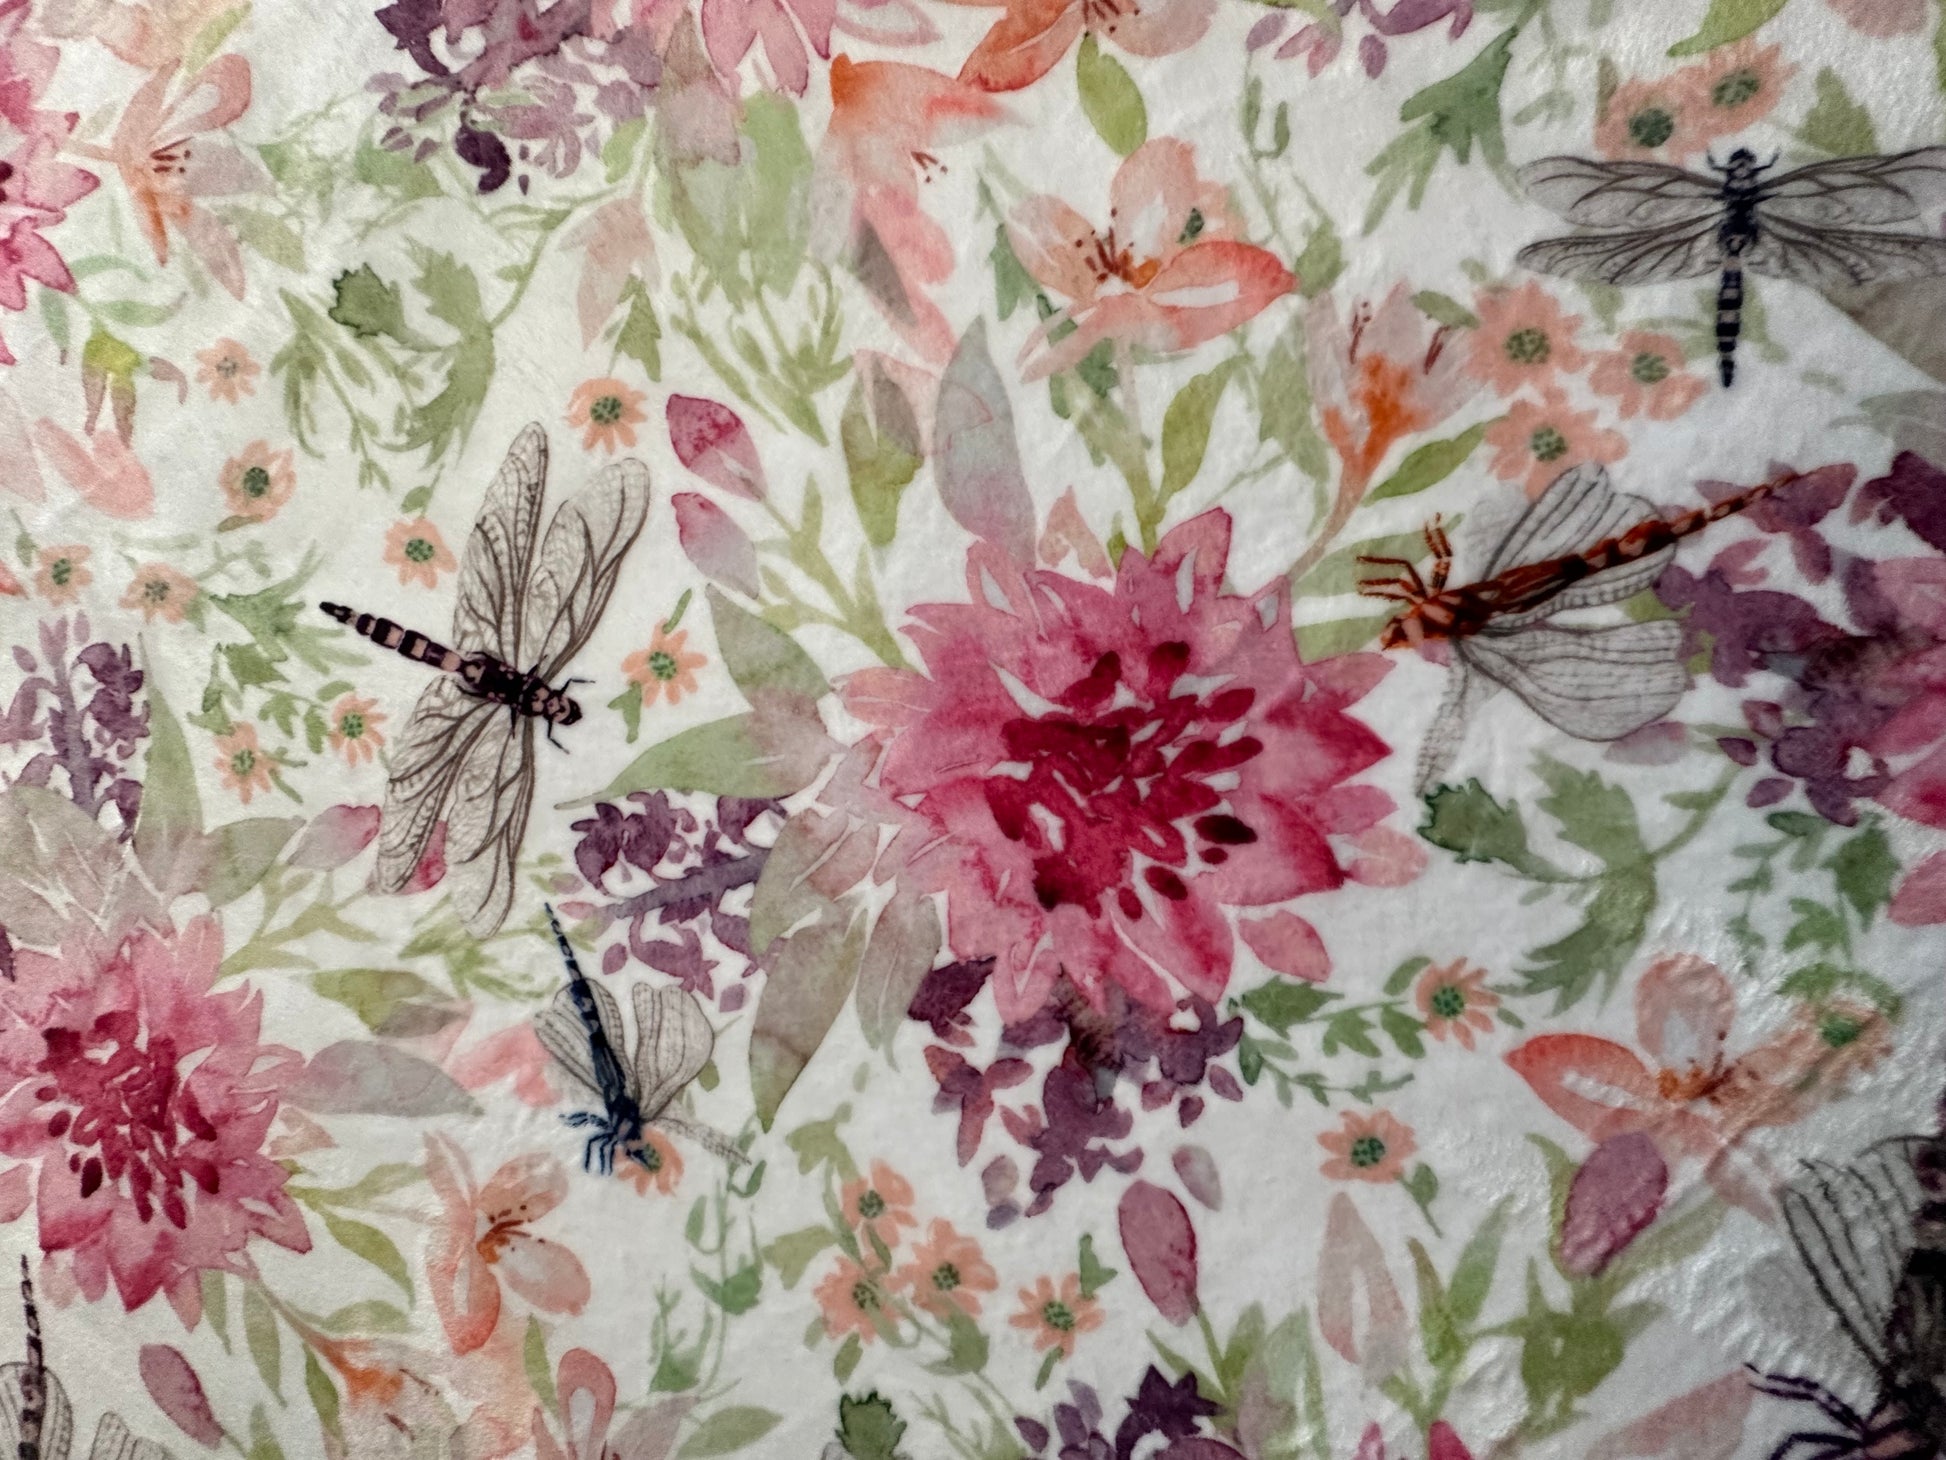 Dragonfly on Alex Elderberry Large Throw - Whimsical Nature - 55x67